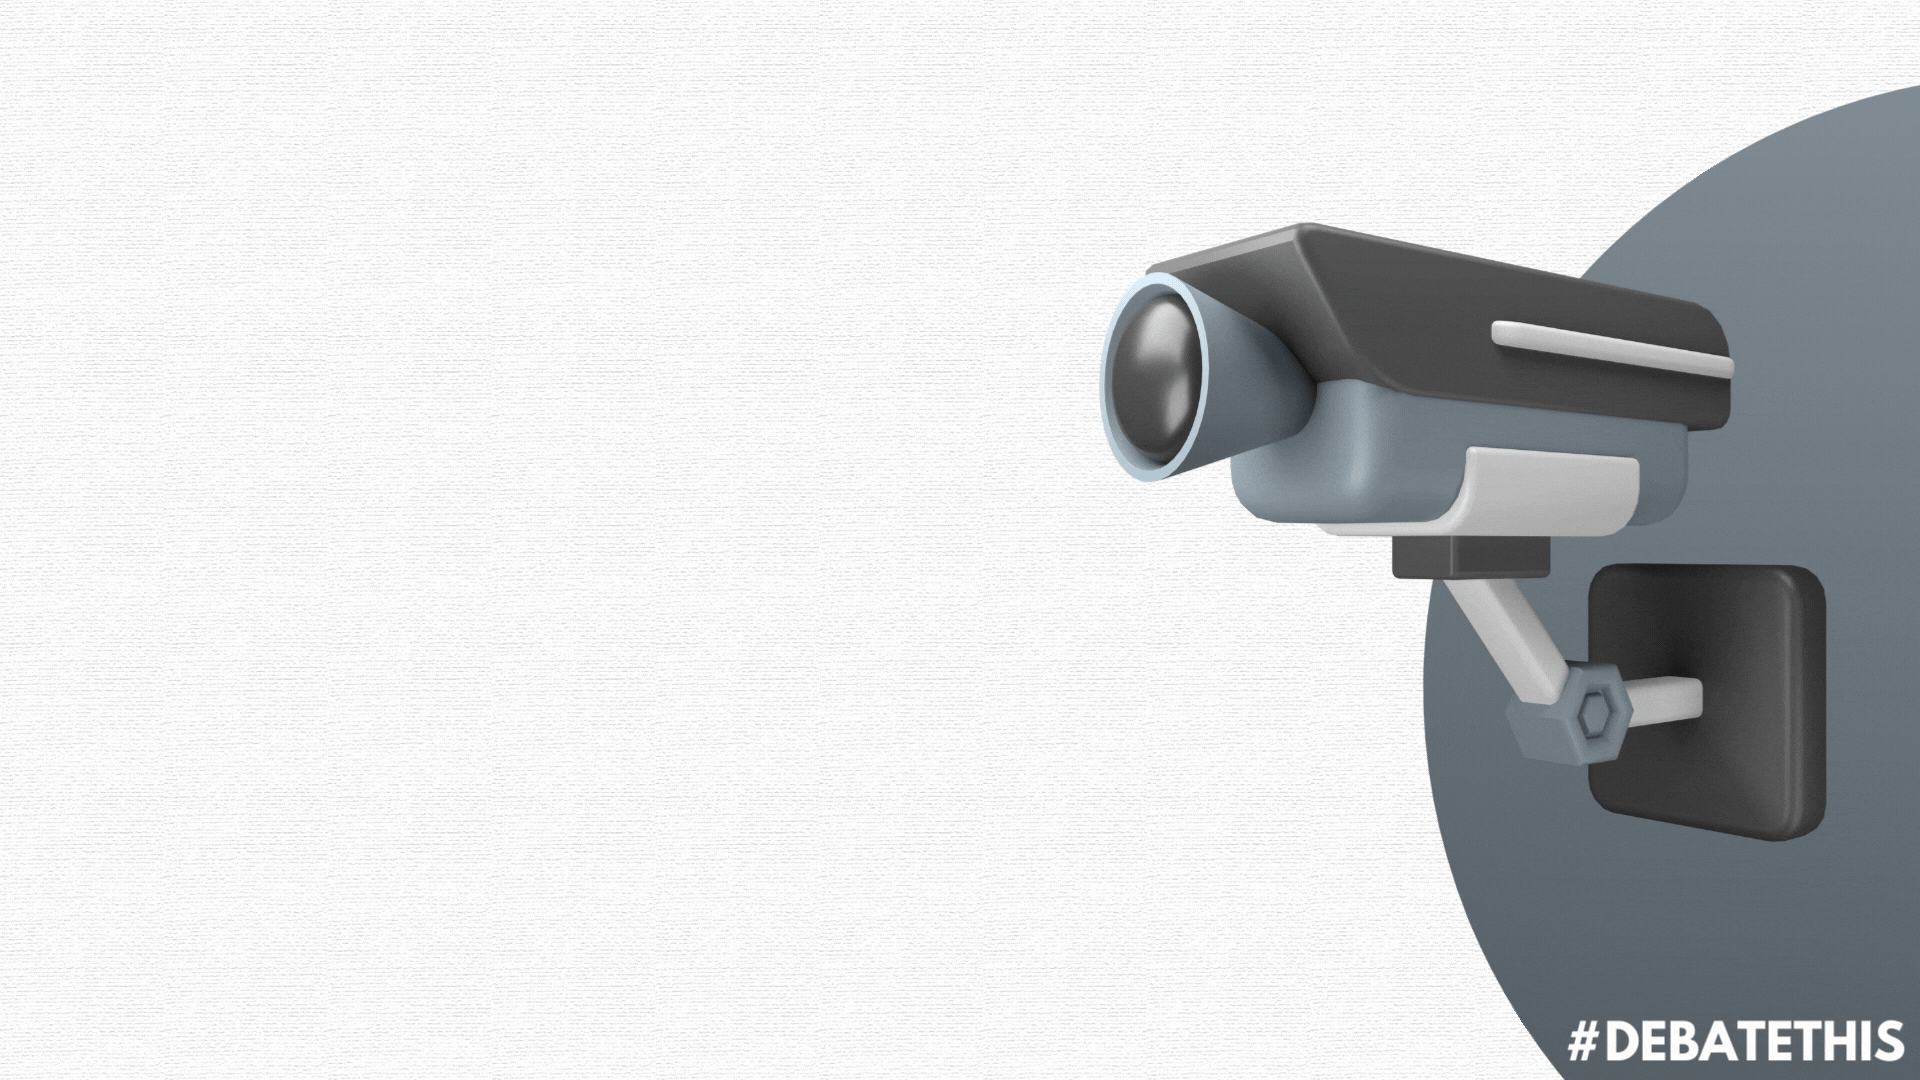 #DebateThis - Should the use of surveillance cameras in public places be increased?